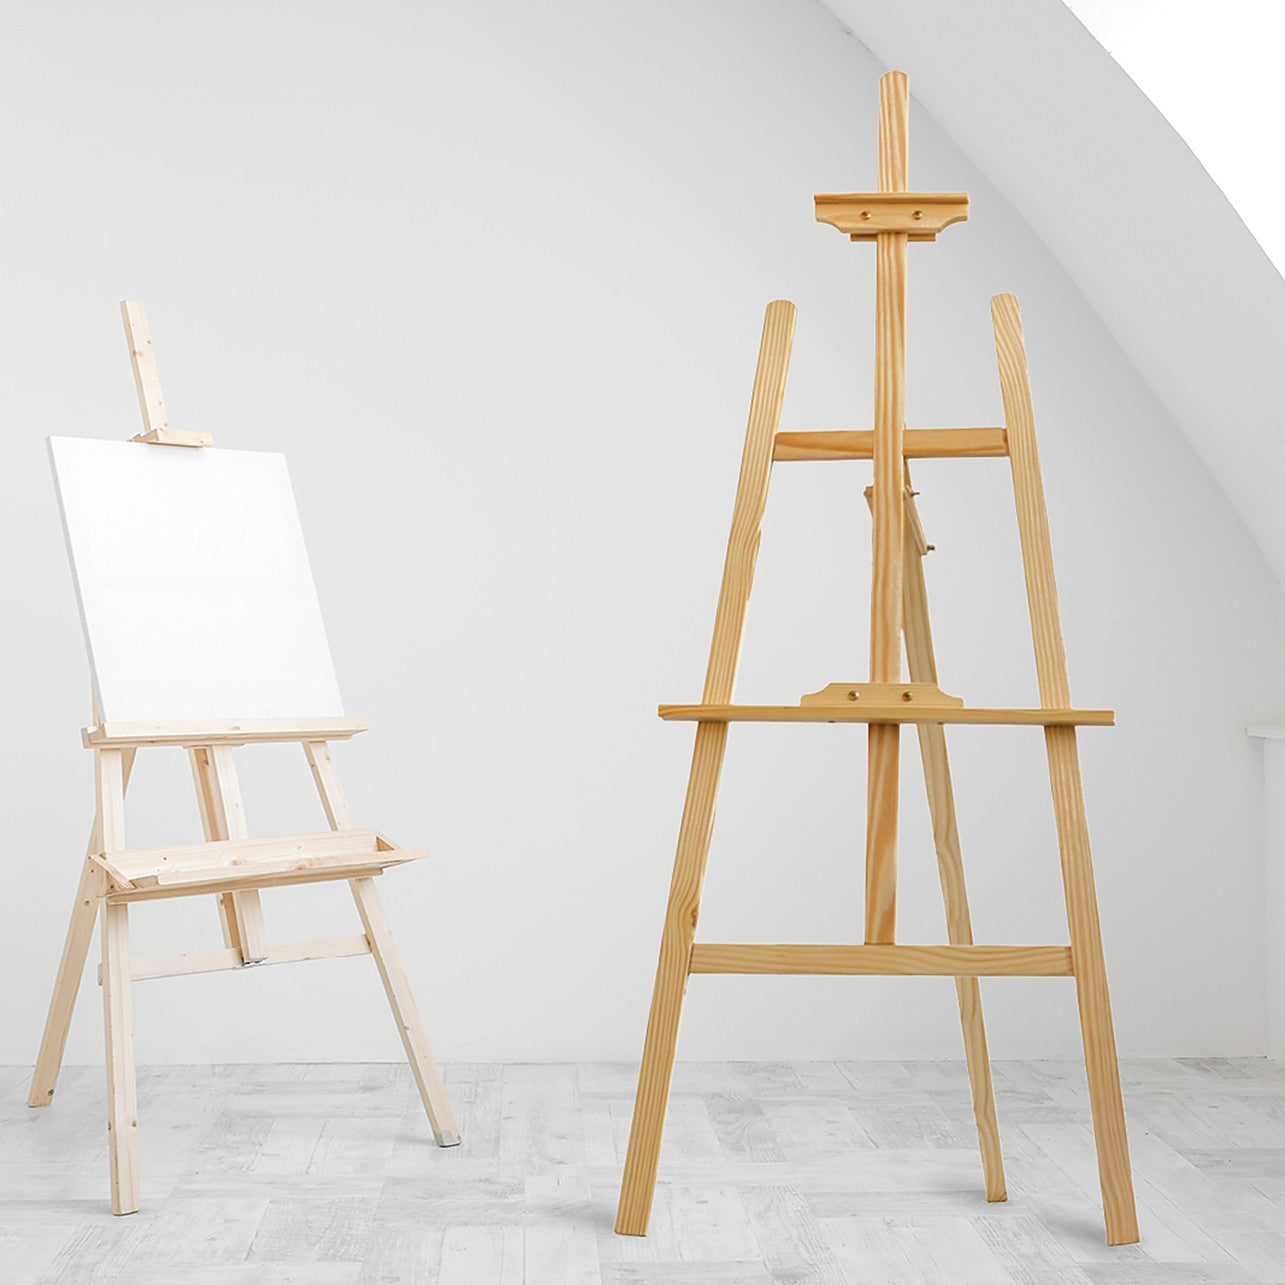 Explore the Beauty of Digital Illustration with Easel